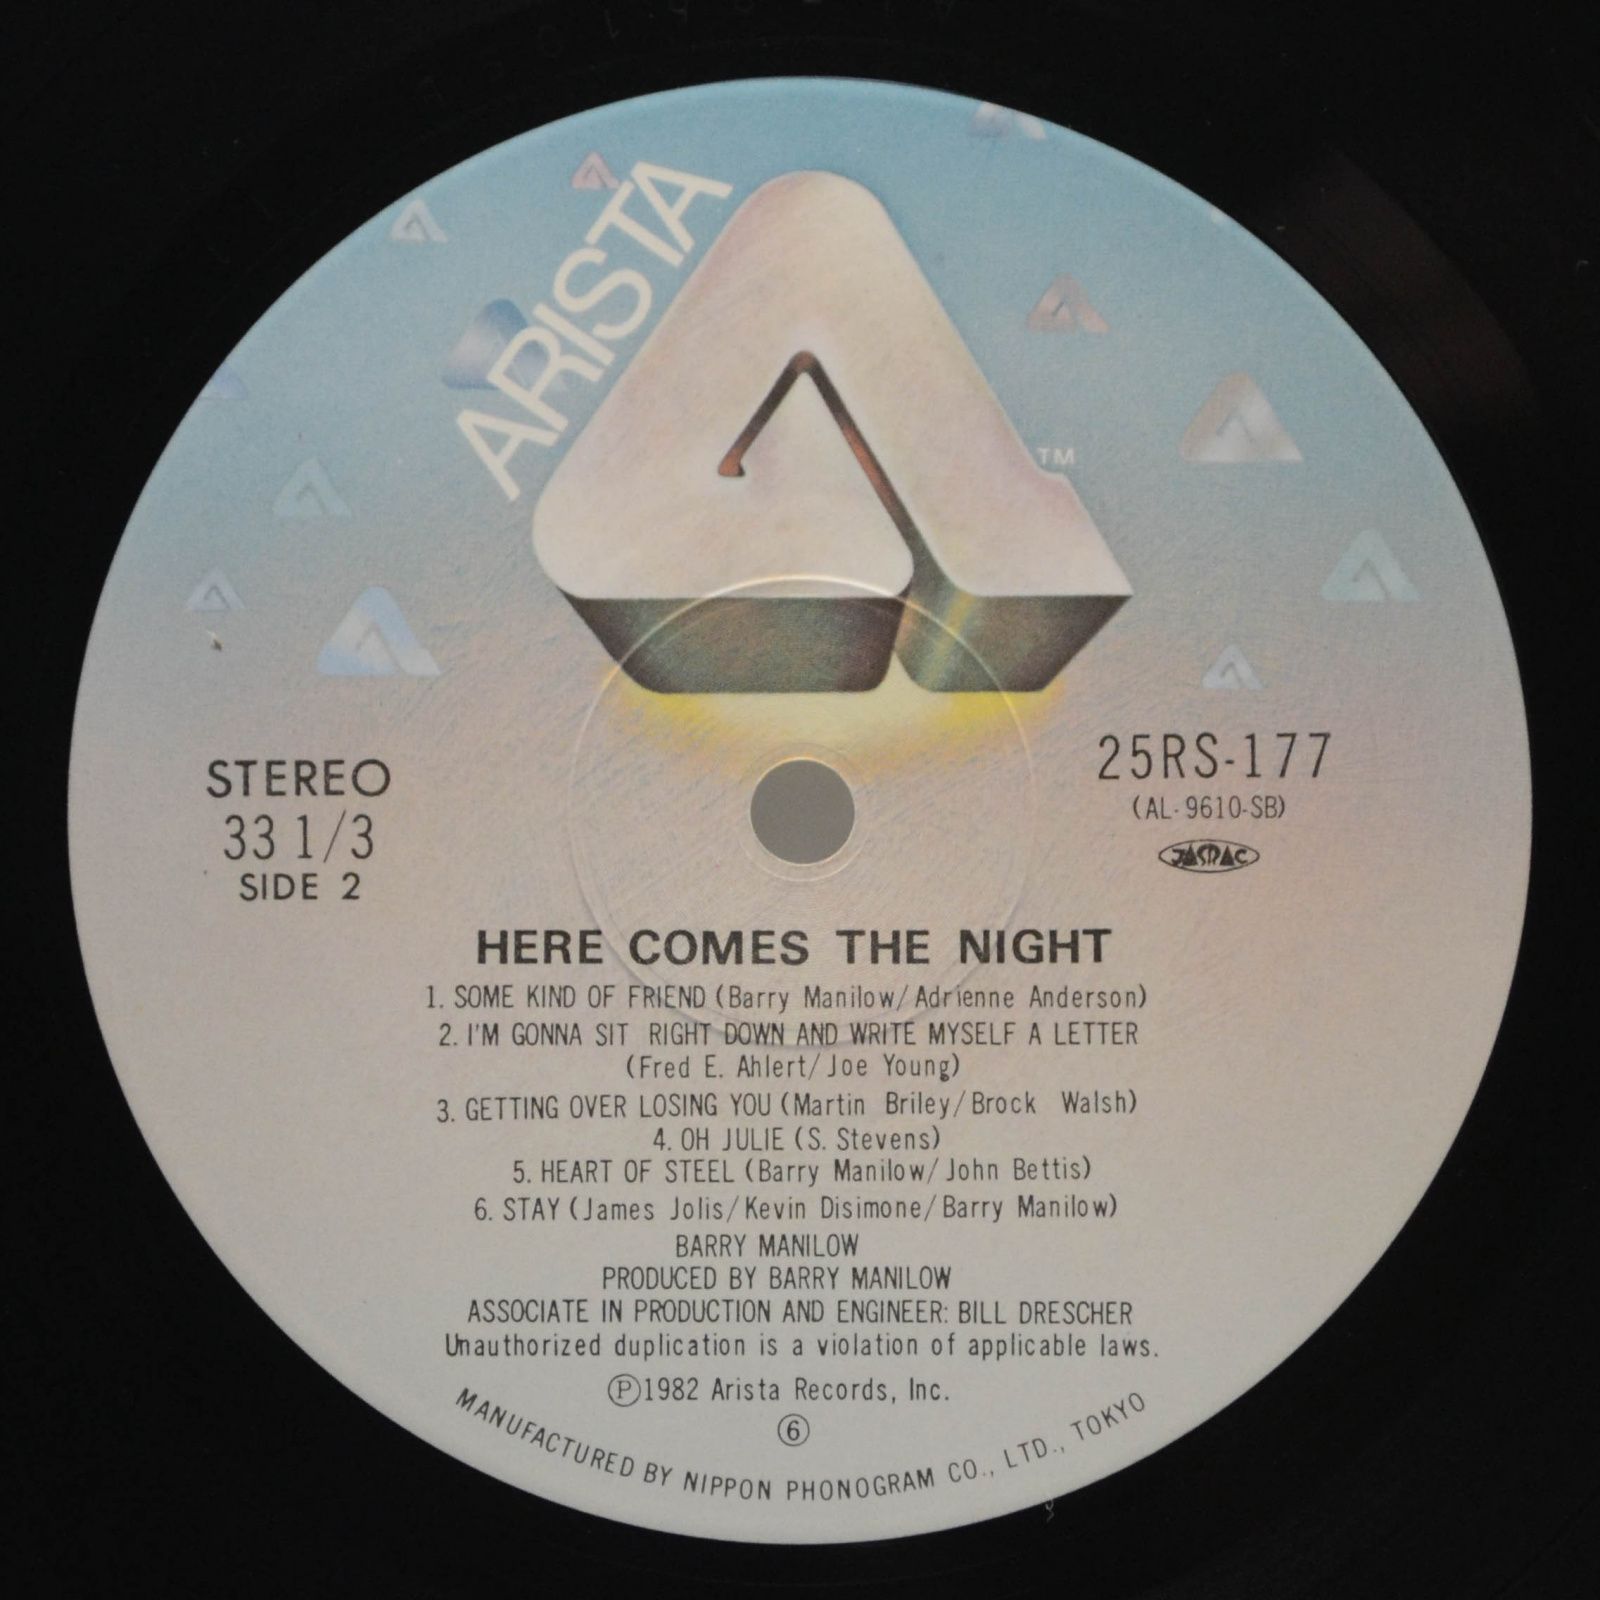 Barry Manilow — Here Comes The Night, 1982